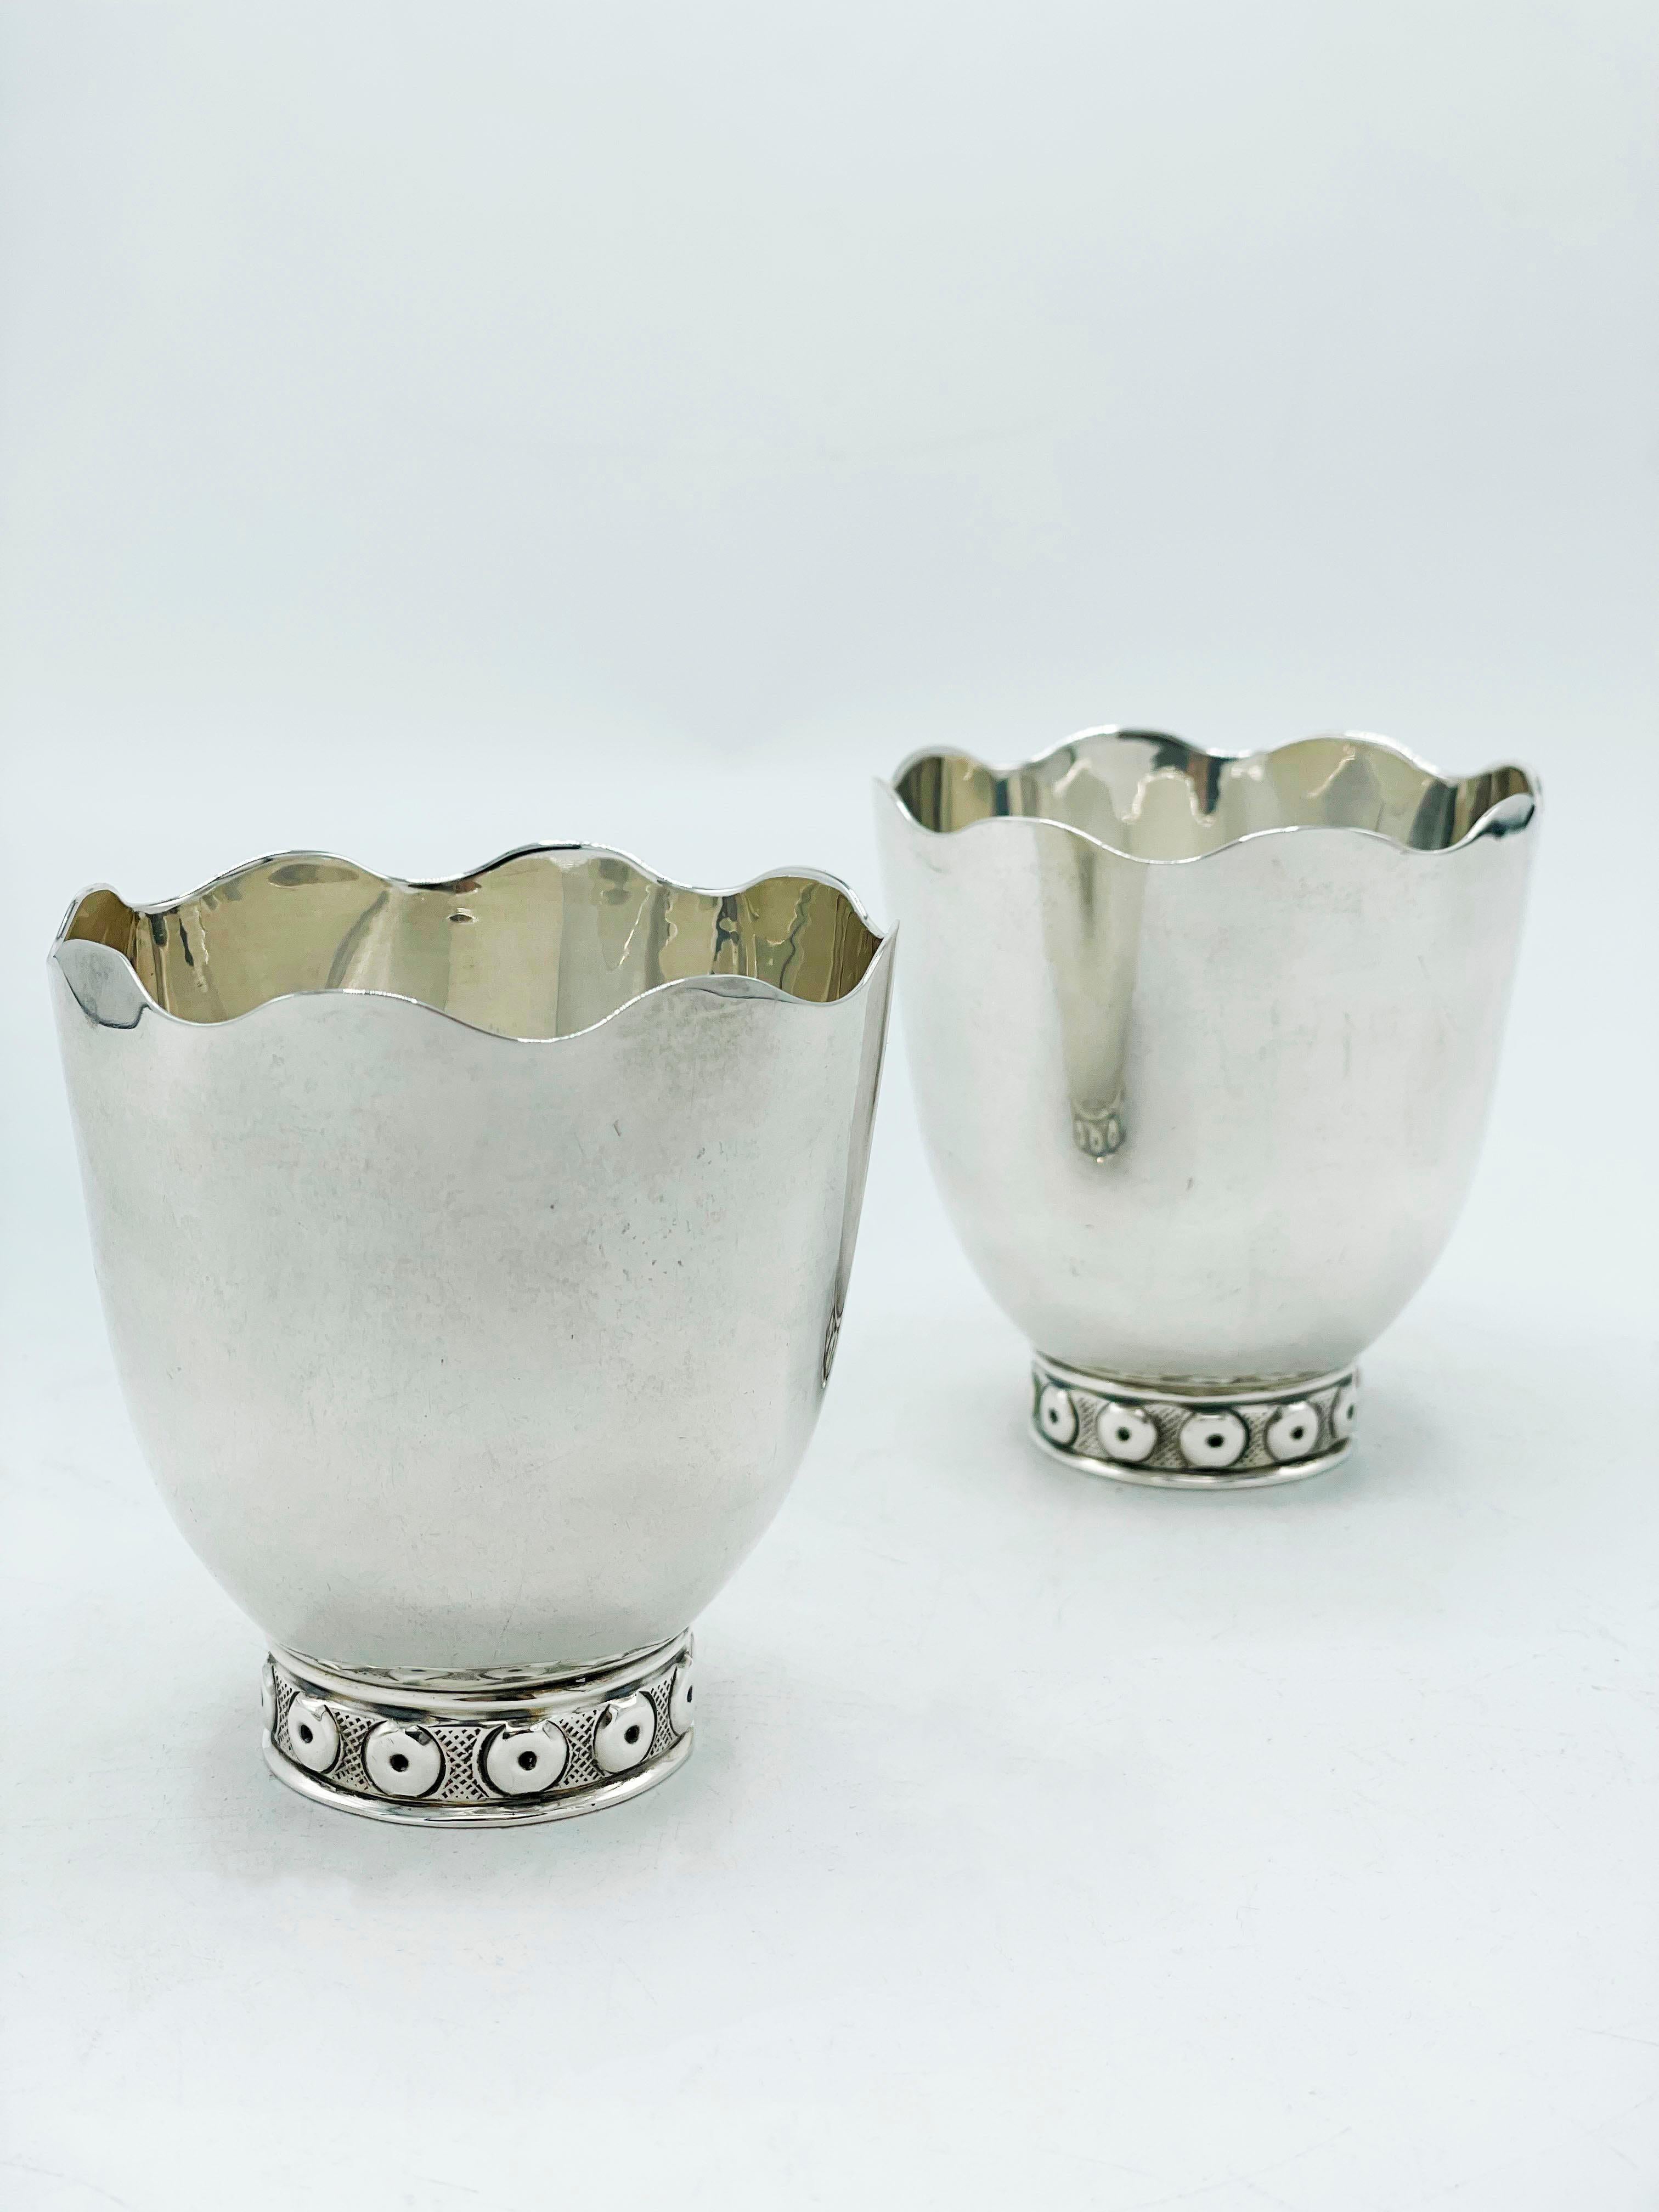 Pair of sterling Silver Glasses by Tane Orfebres
Those Glasses are a lovely pieces for those that collect fine Mexican silver, silver by this listed maker, or you're looking for a piece like this to dress up your home!

Measurements

4 centiemters: